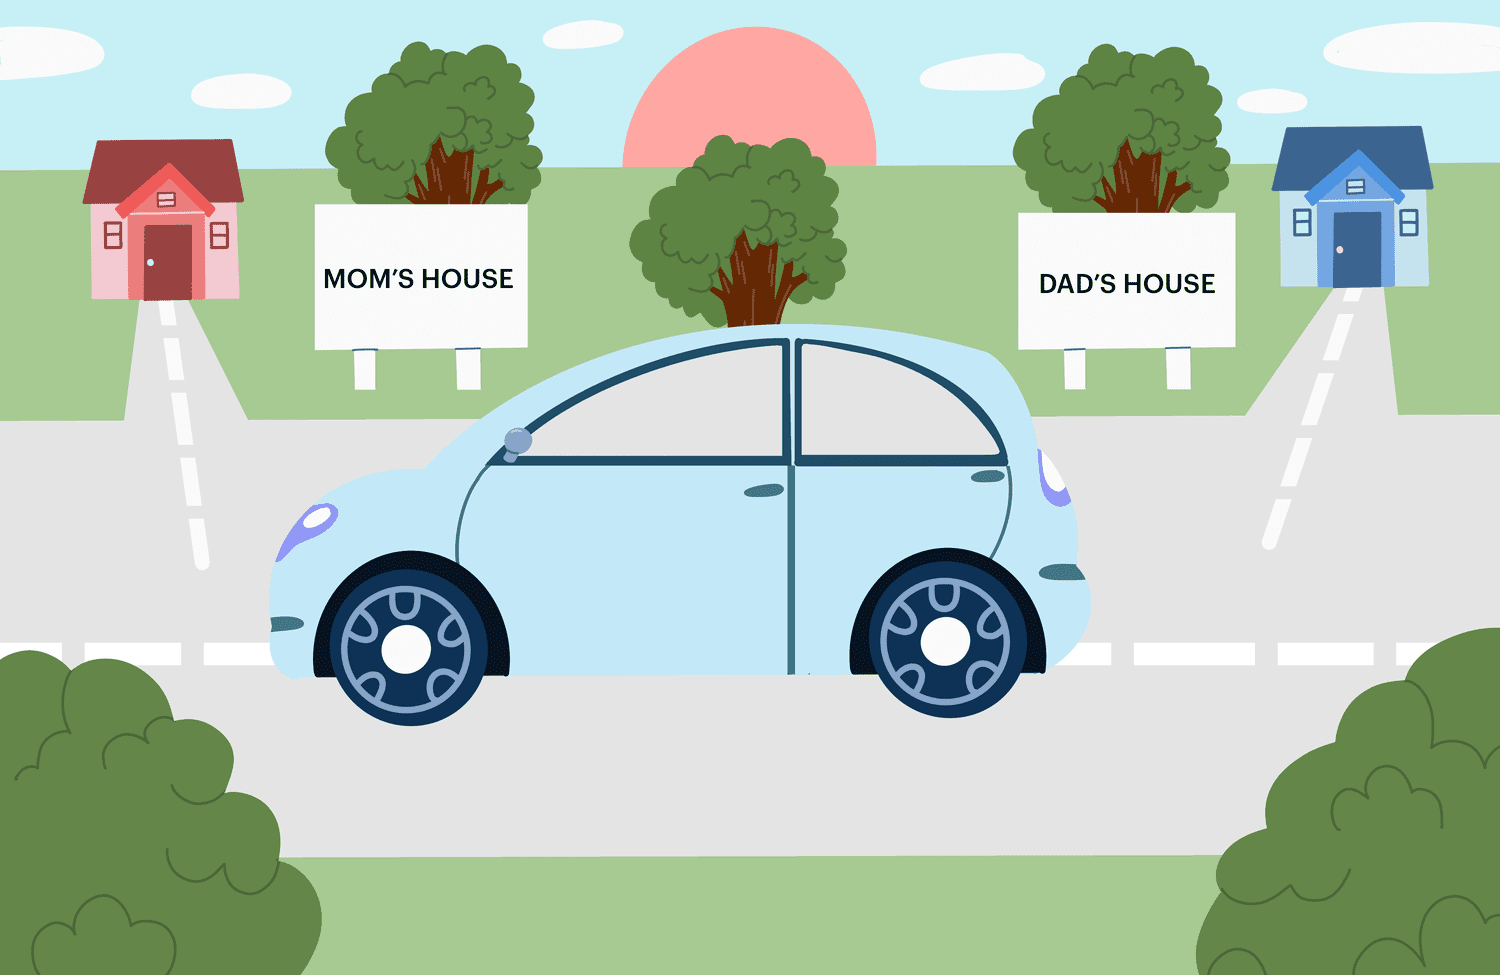 Illustration of a car driving from dad's house to mom's house